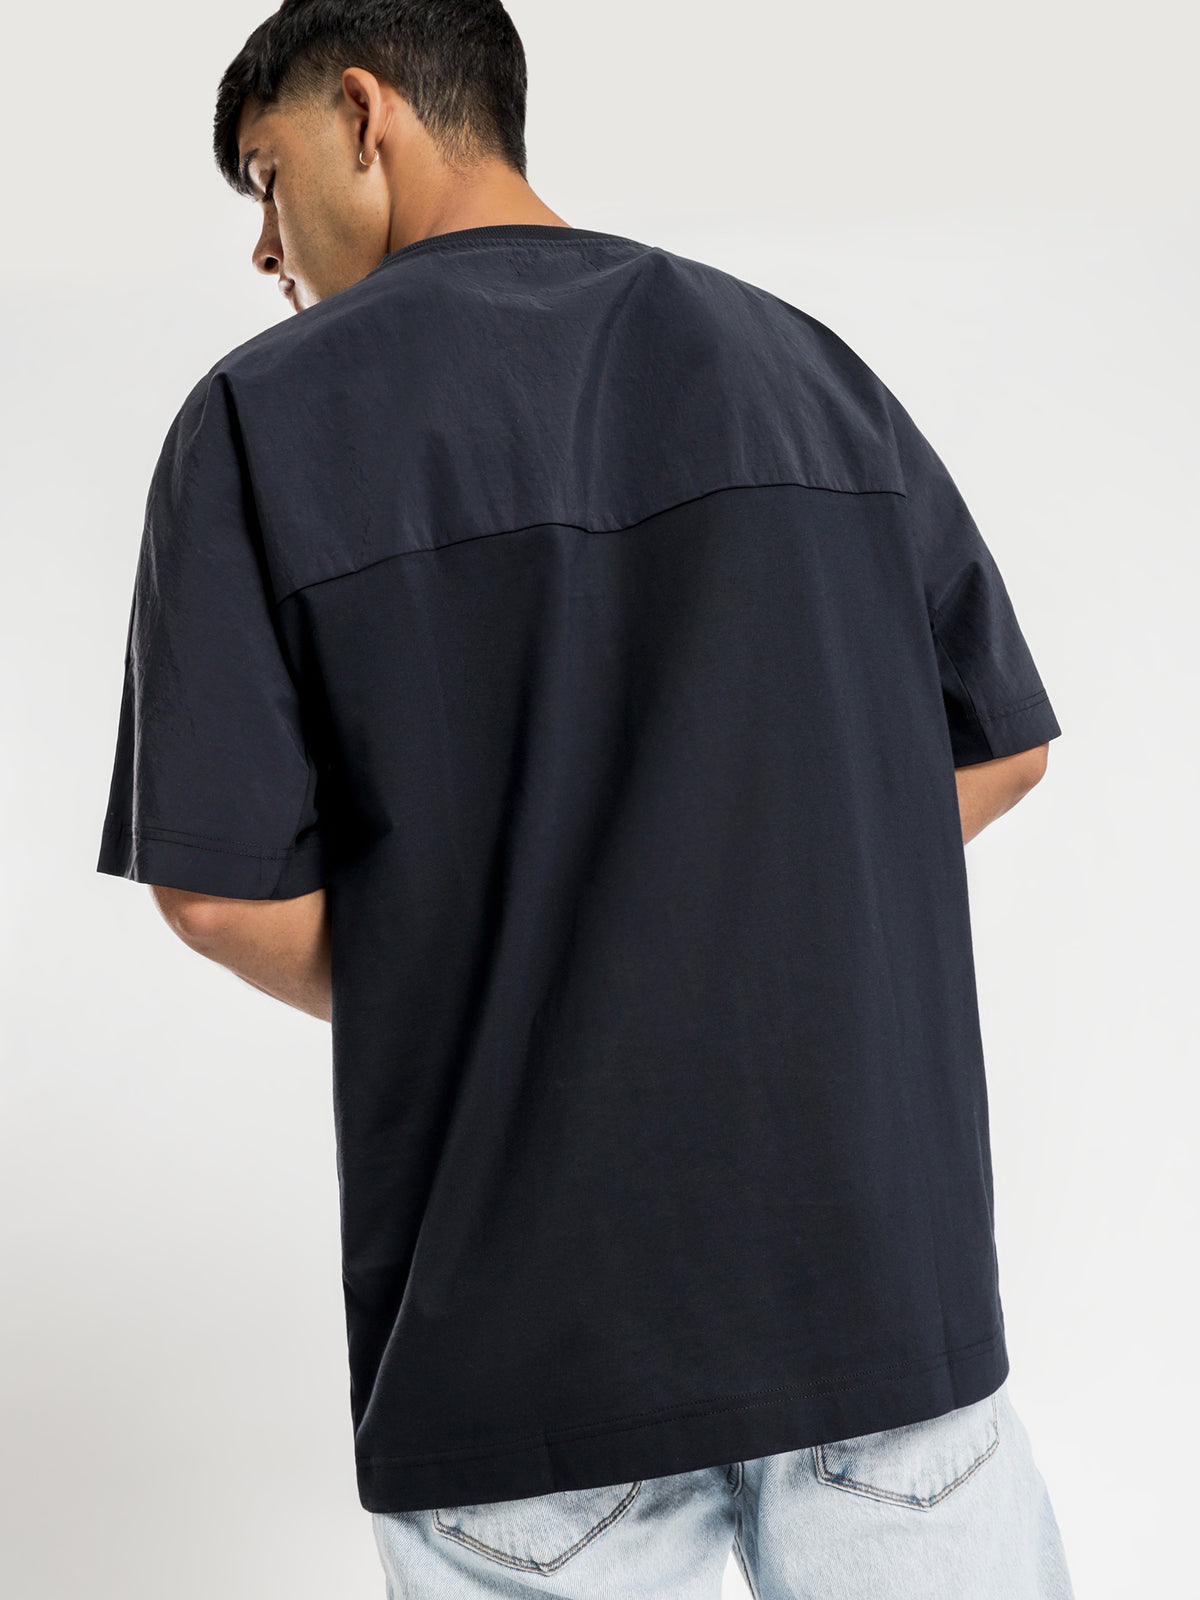 Woven Panel T-Shirt in Navy